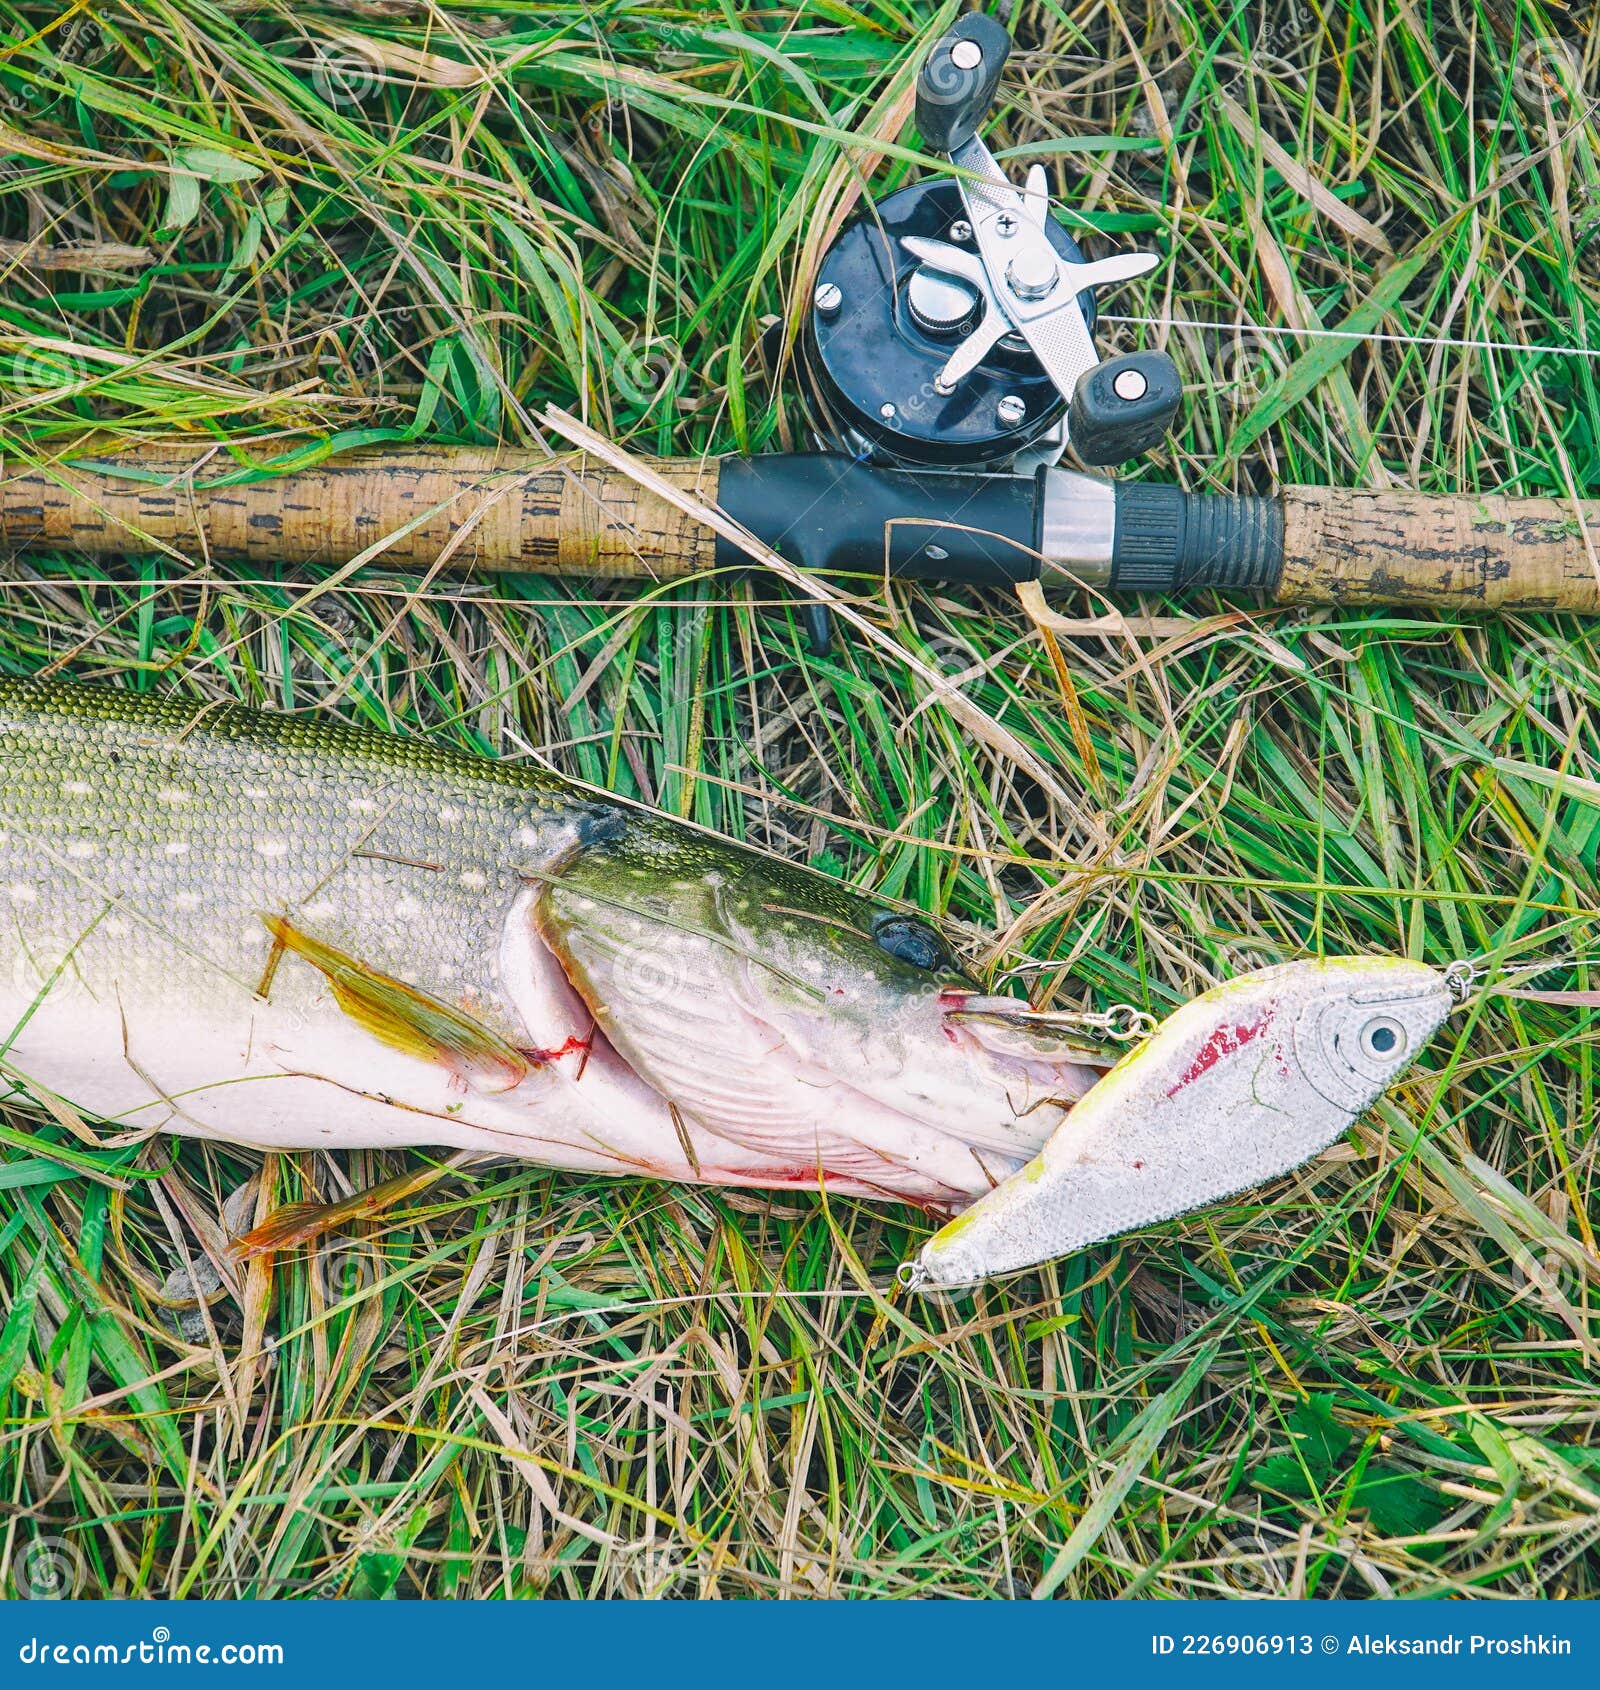 Pike and Spinning with Baitcasting Reel on Grass Stock Image